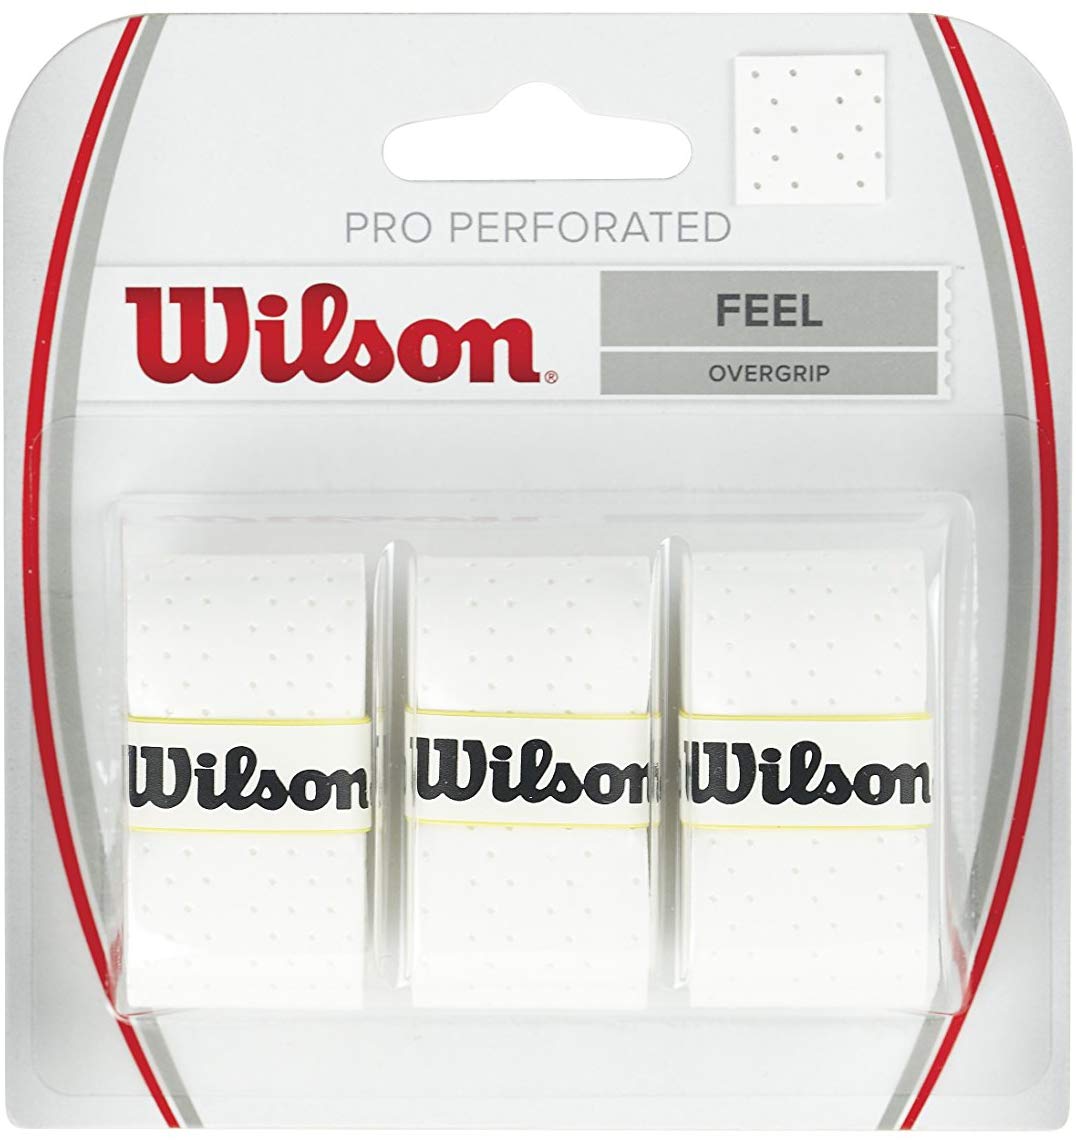 Overgrip Wilson Pro Perforated Feel - Cores